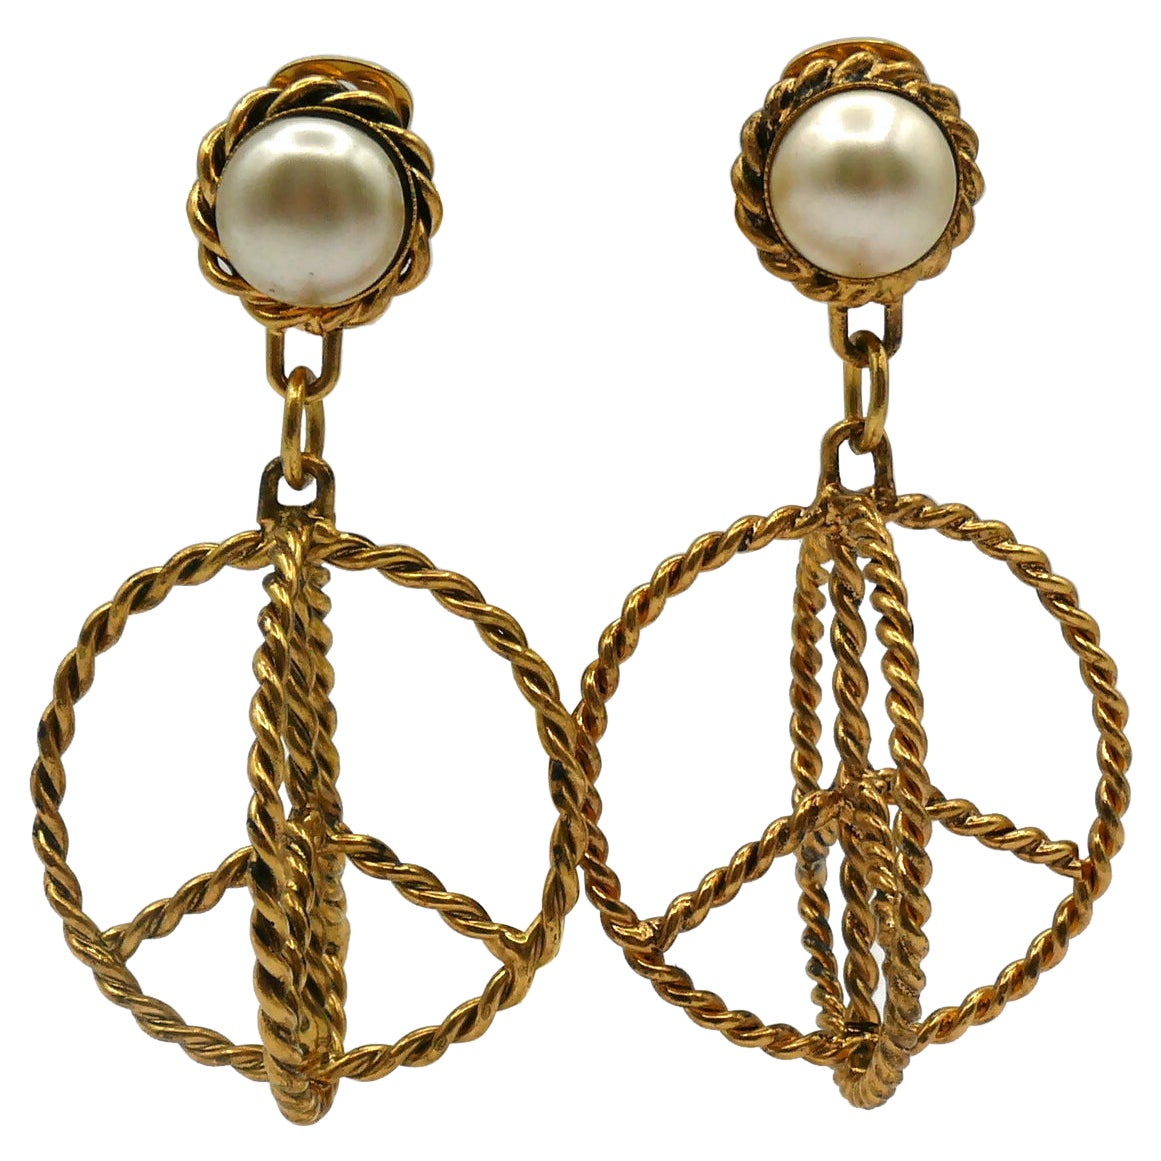 MOSCHINO Vintage Gold Tone Peace Dangling Earrings